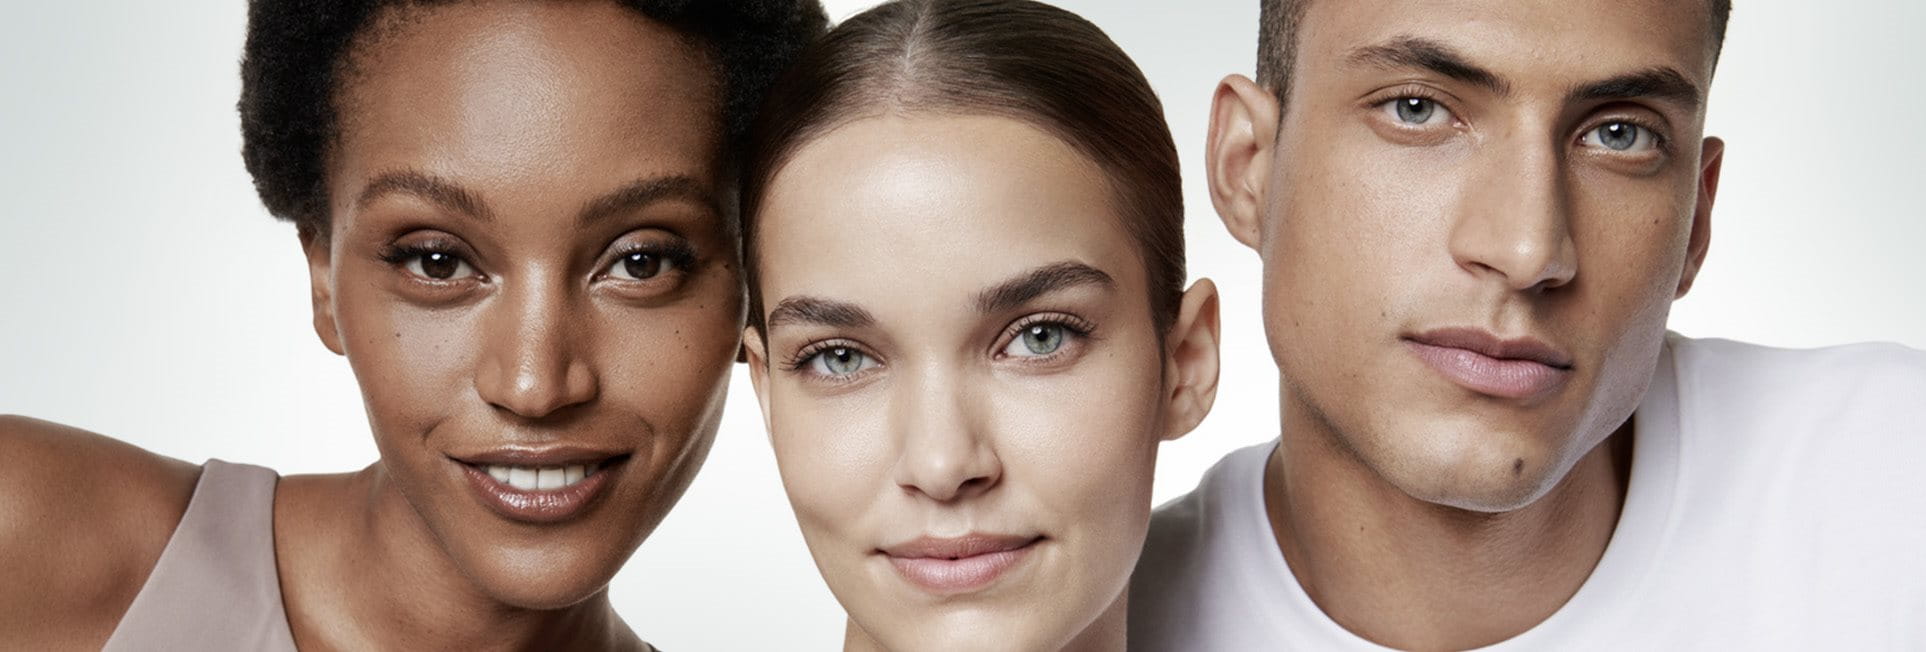 A closeup view of two female models and one male model wearing light coloured tops against a white background.